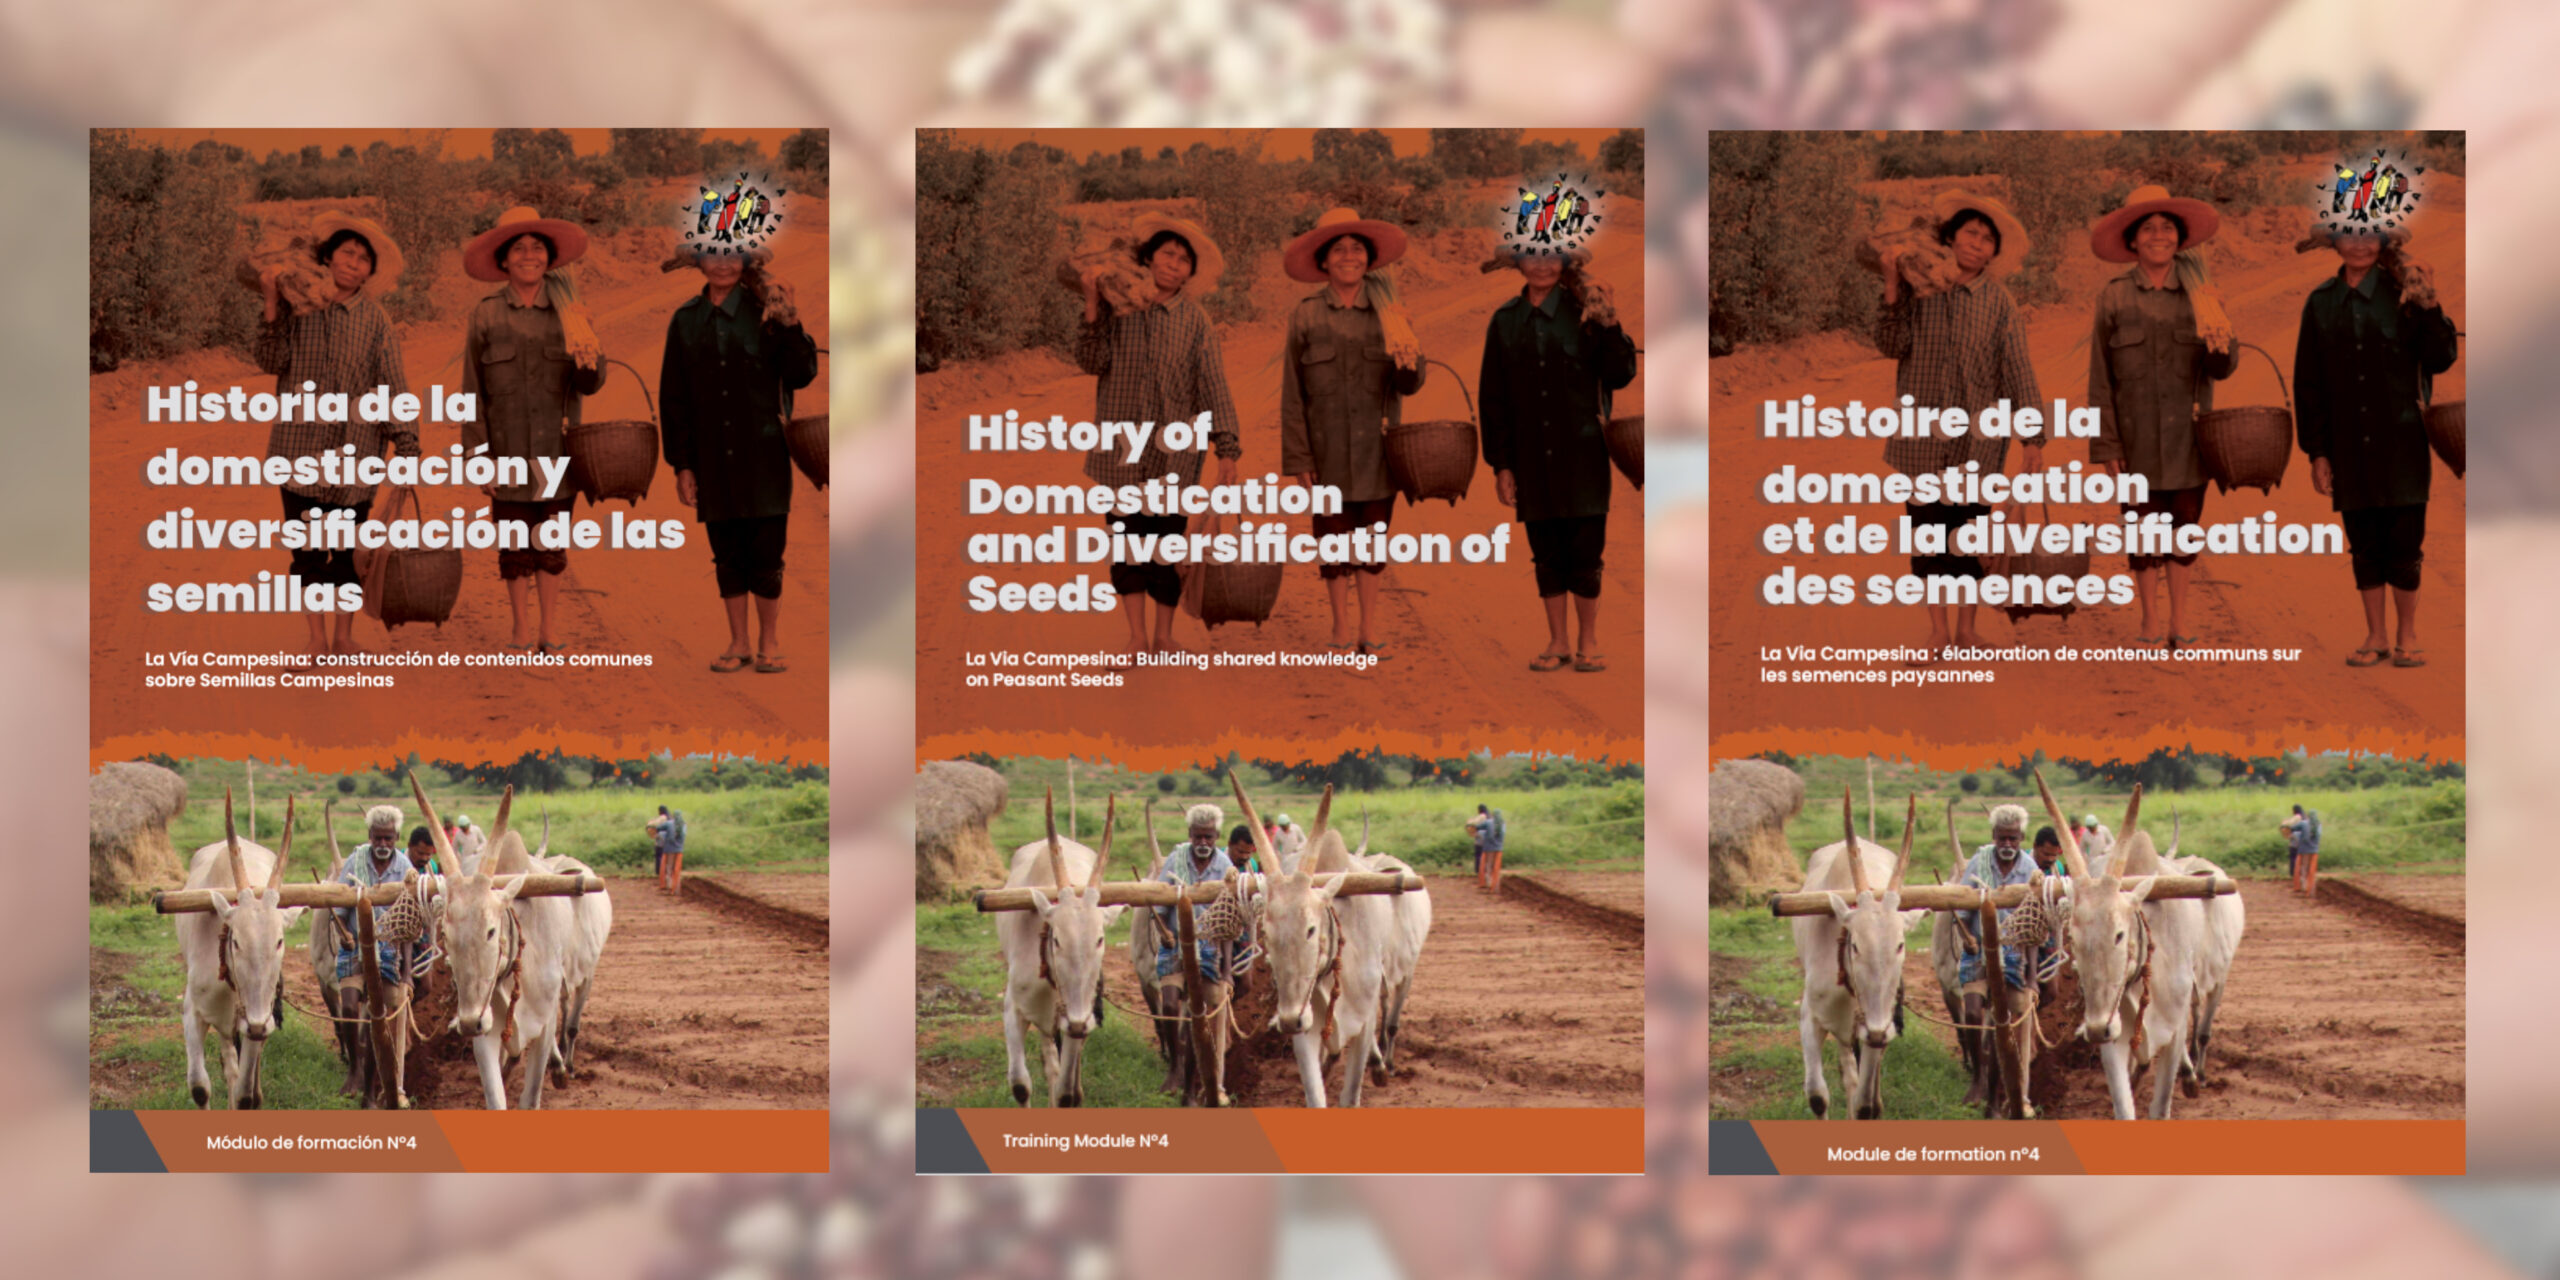 Training module N°4: History of the Domestication and Diversification of Seeds